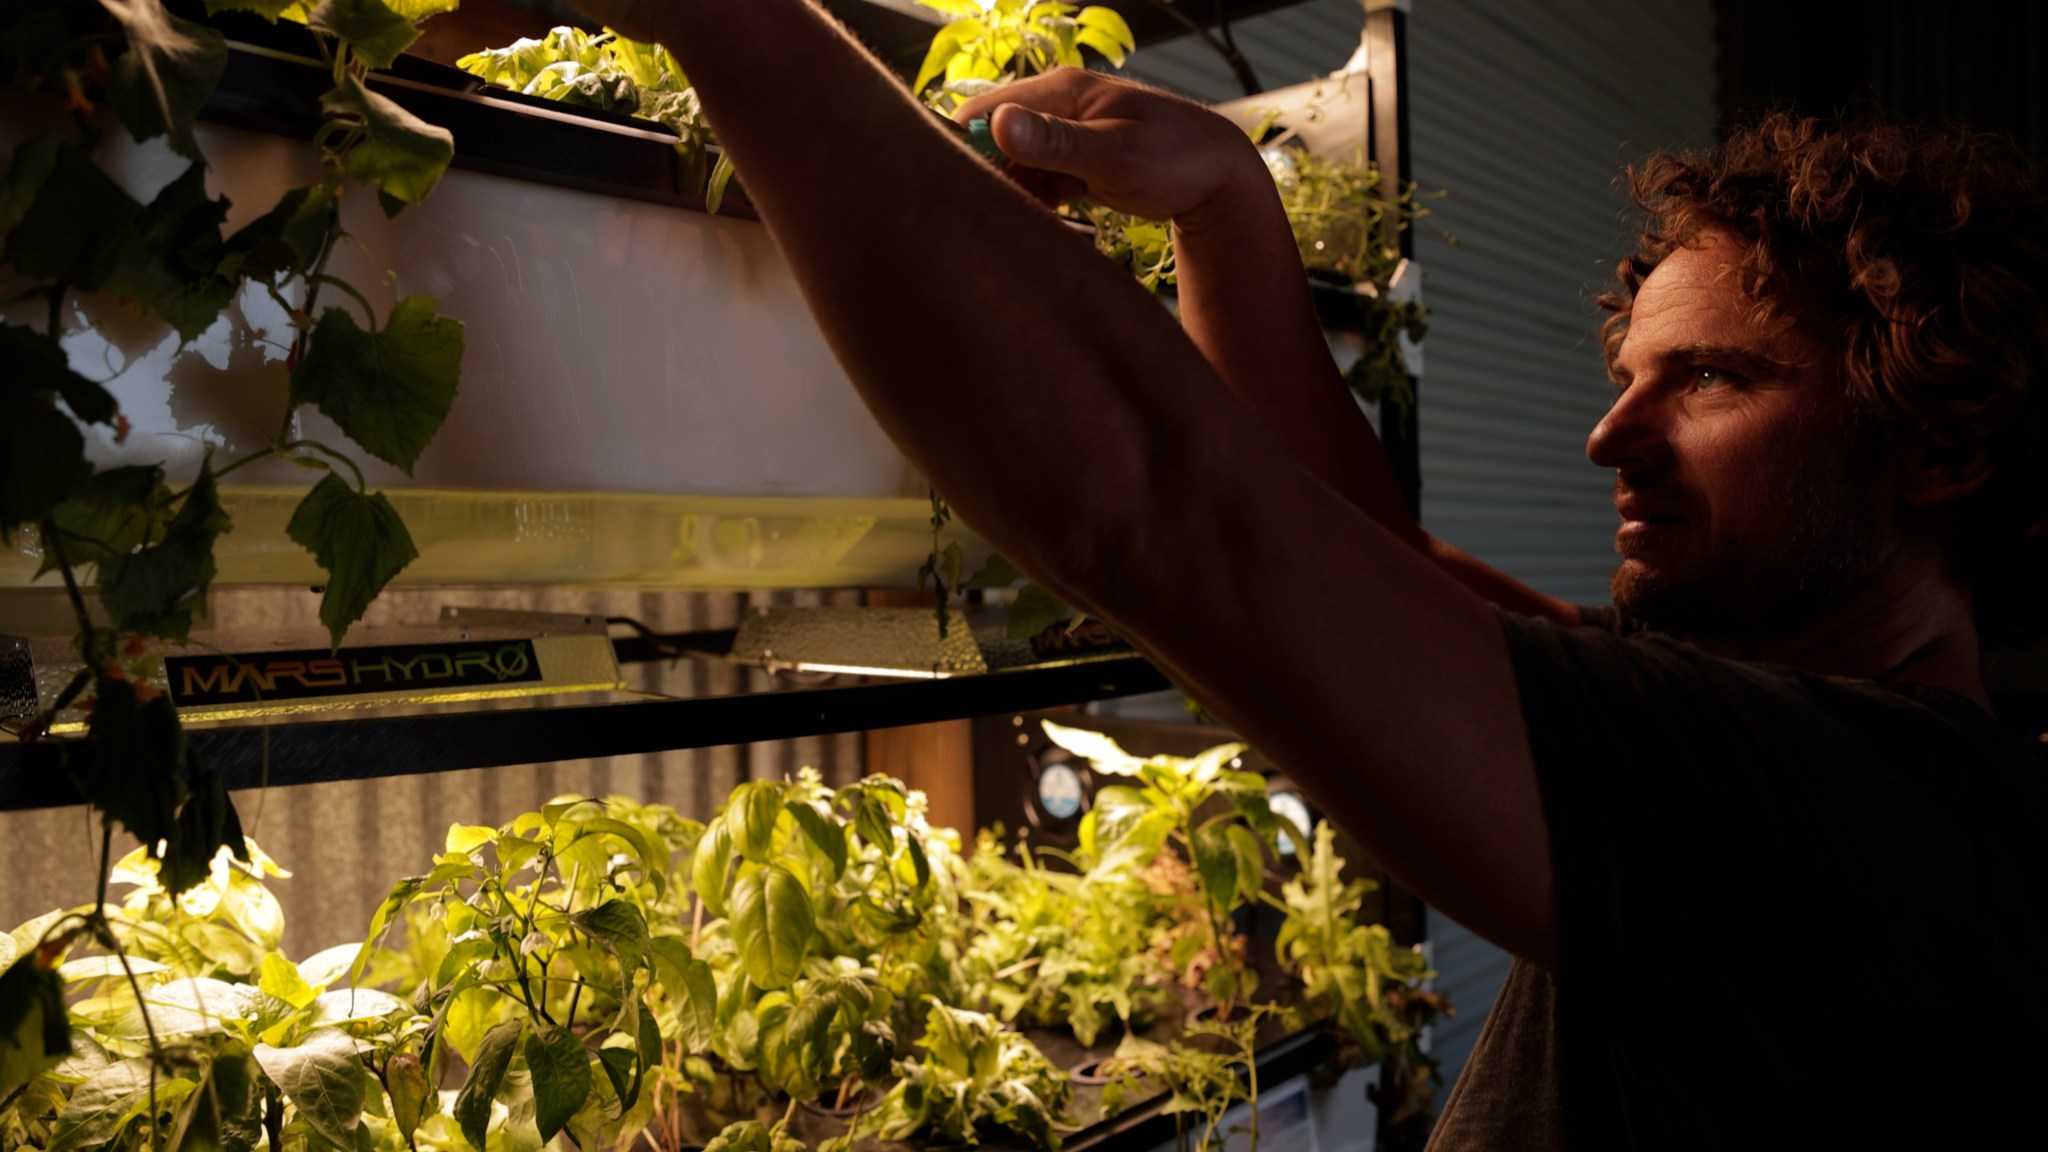 Person looking over plants under grow lights.